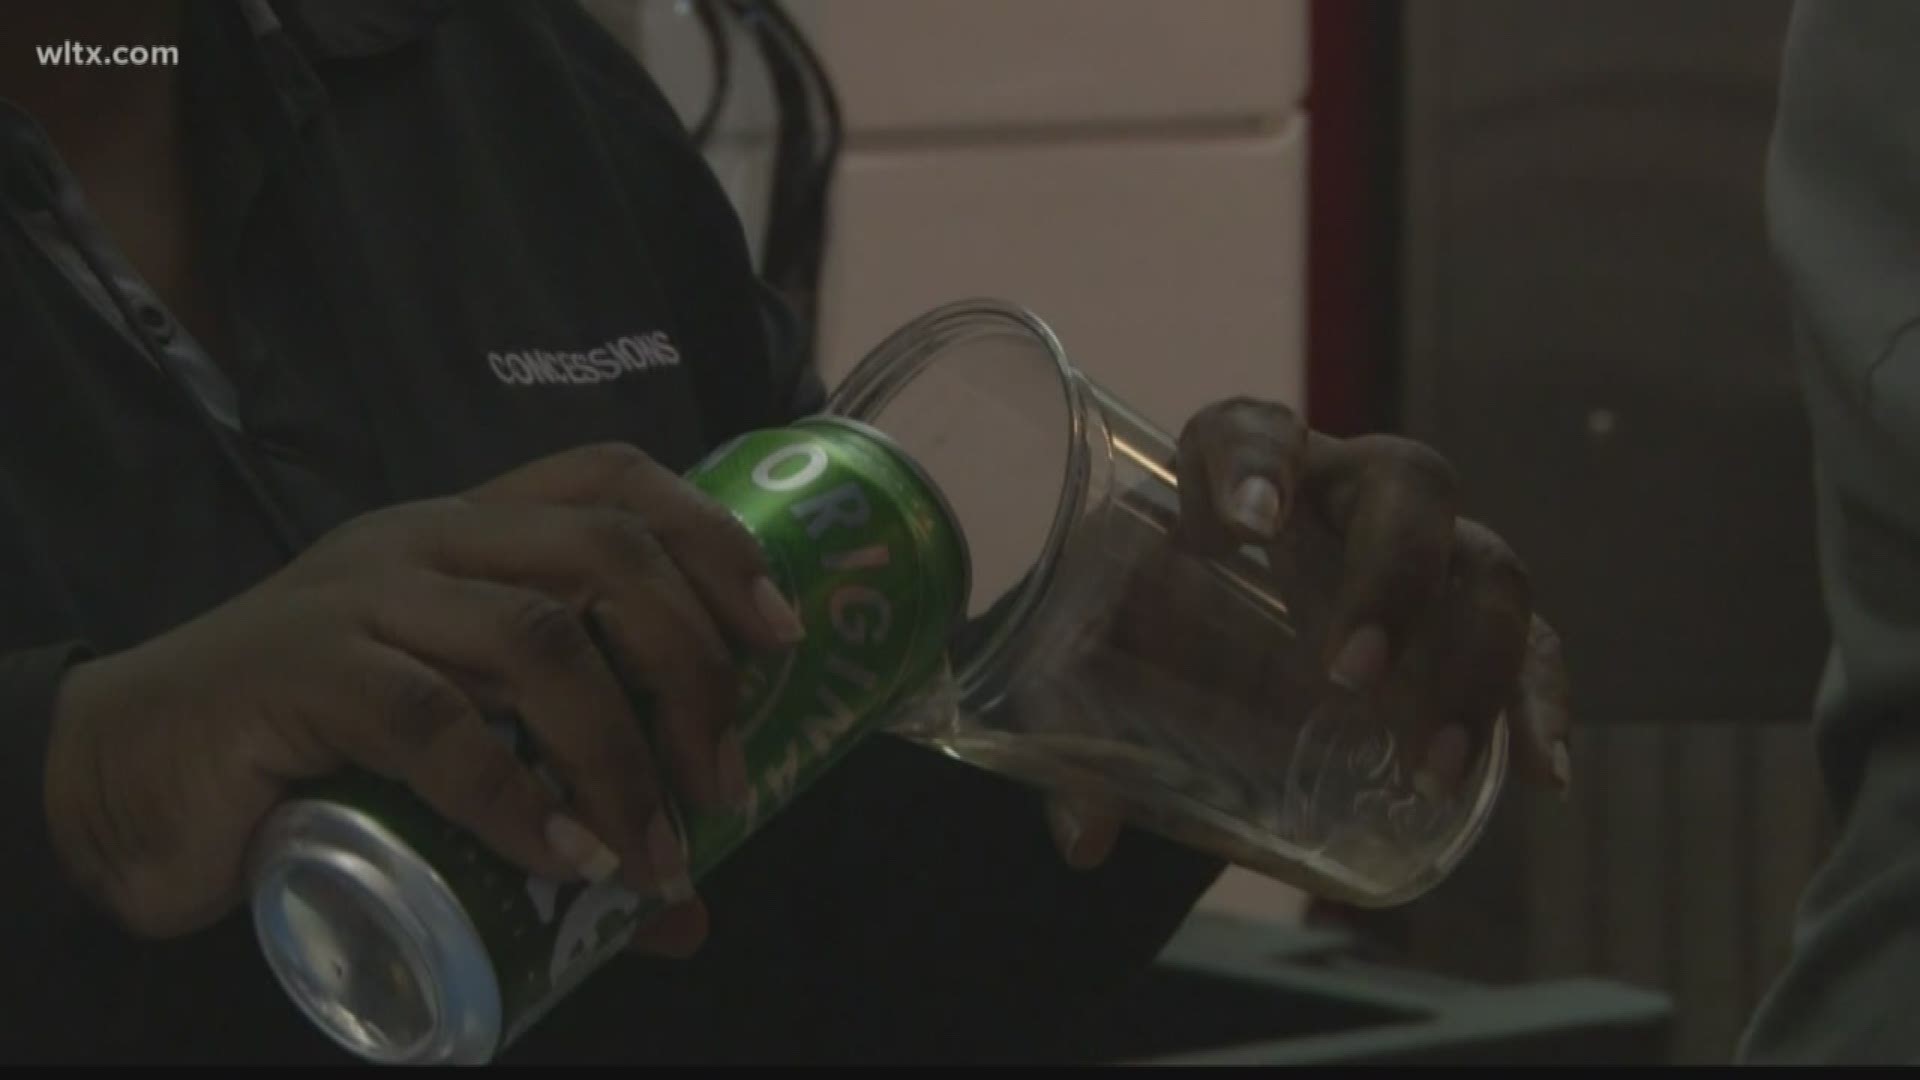 The school will allow alcohol at all basketball, football, and baseball games.